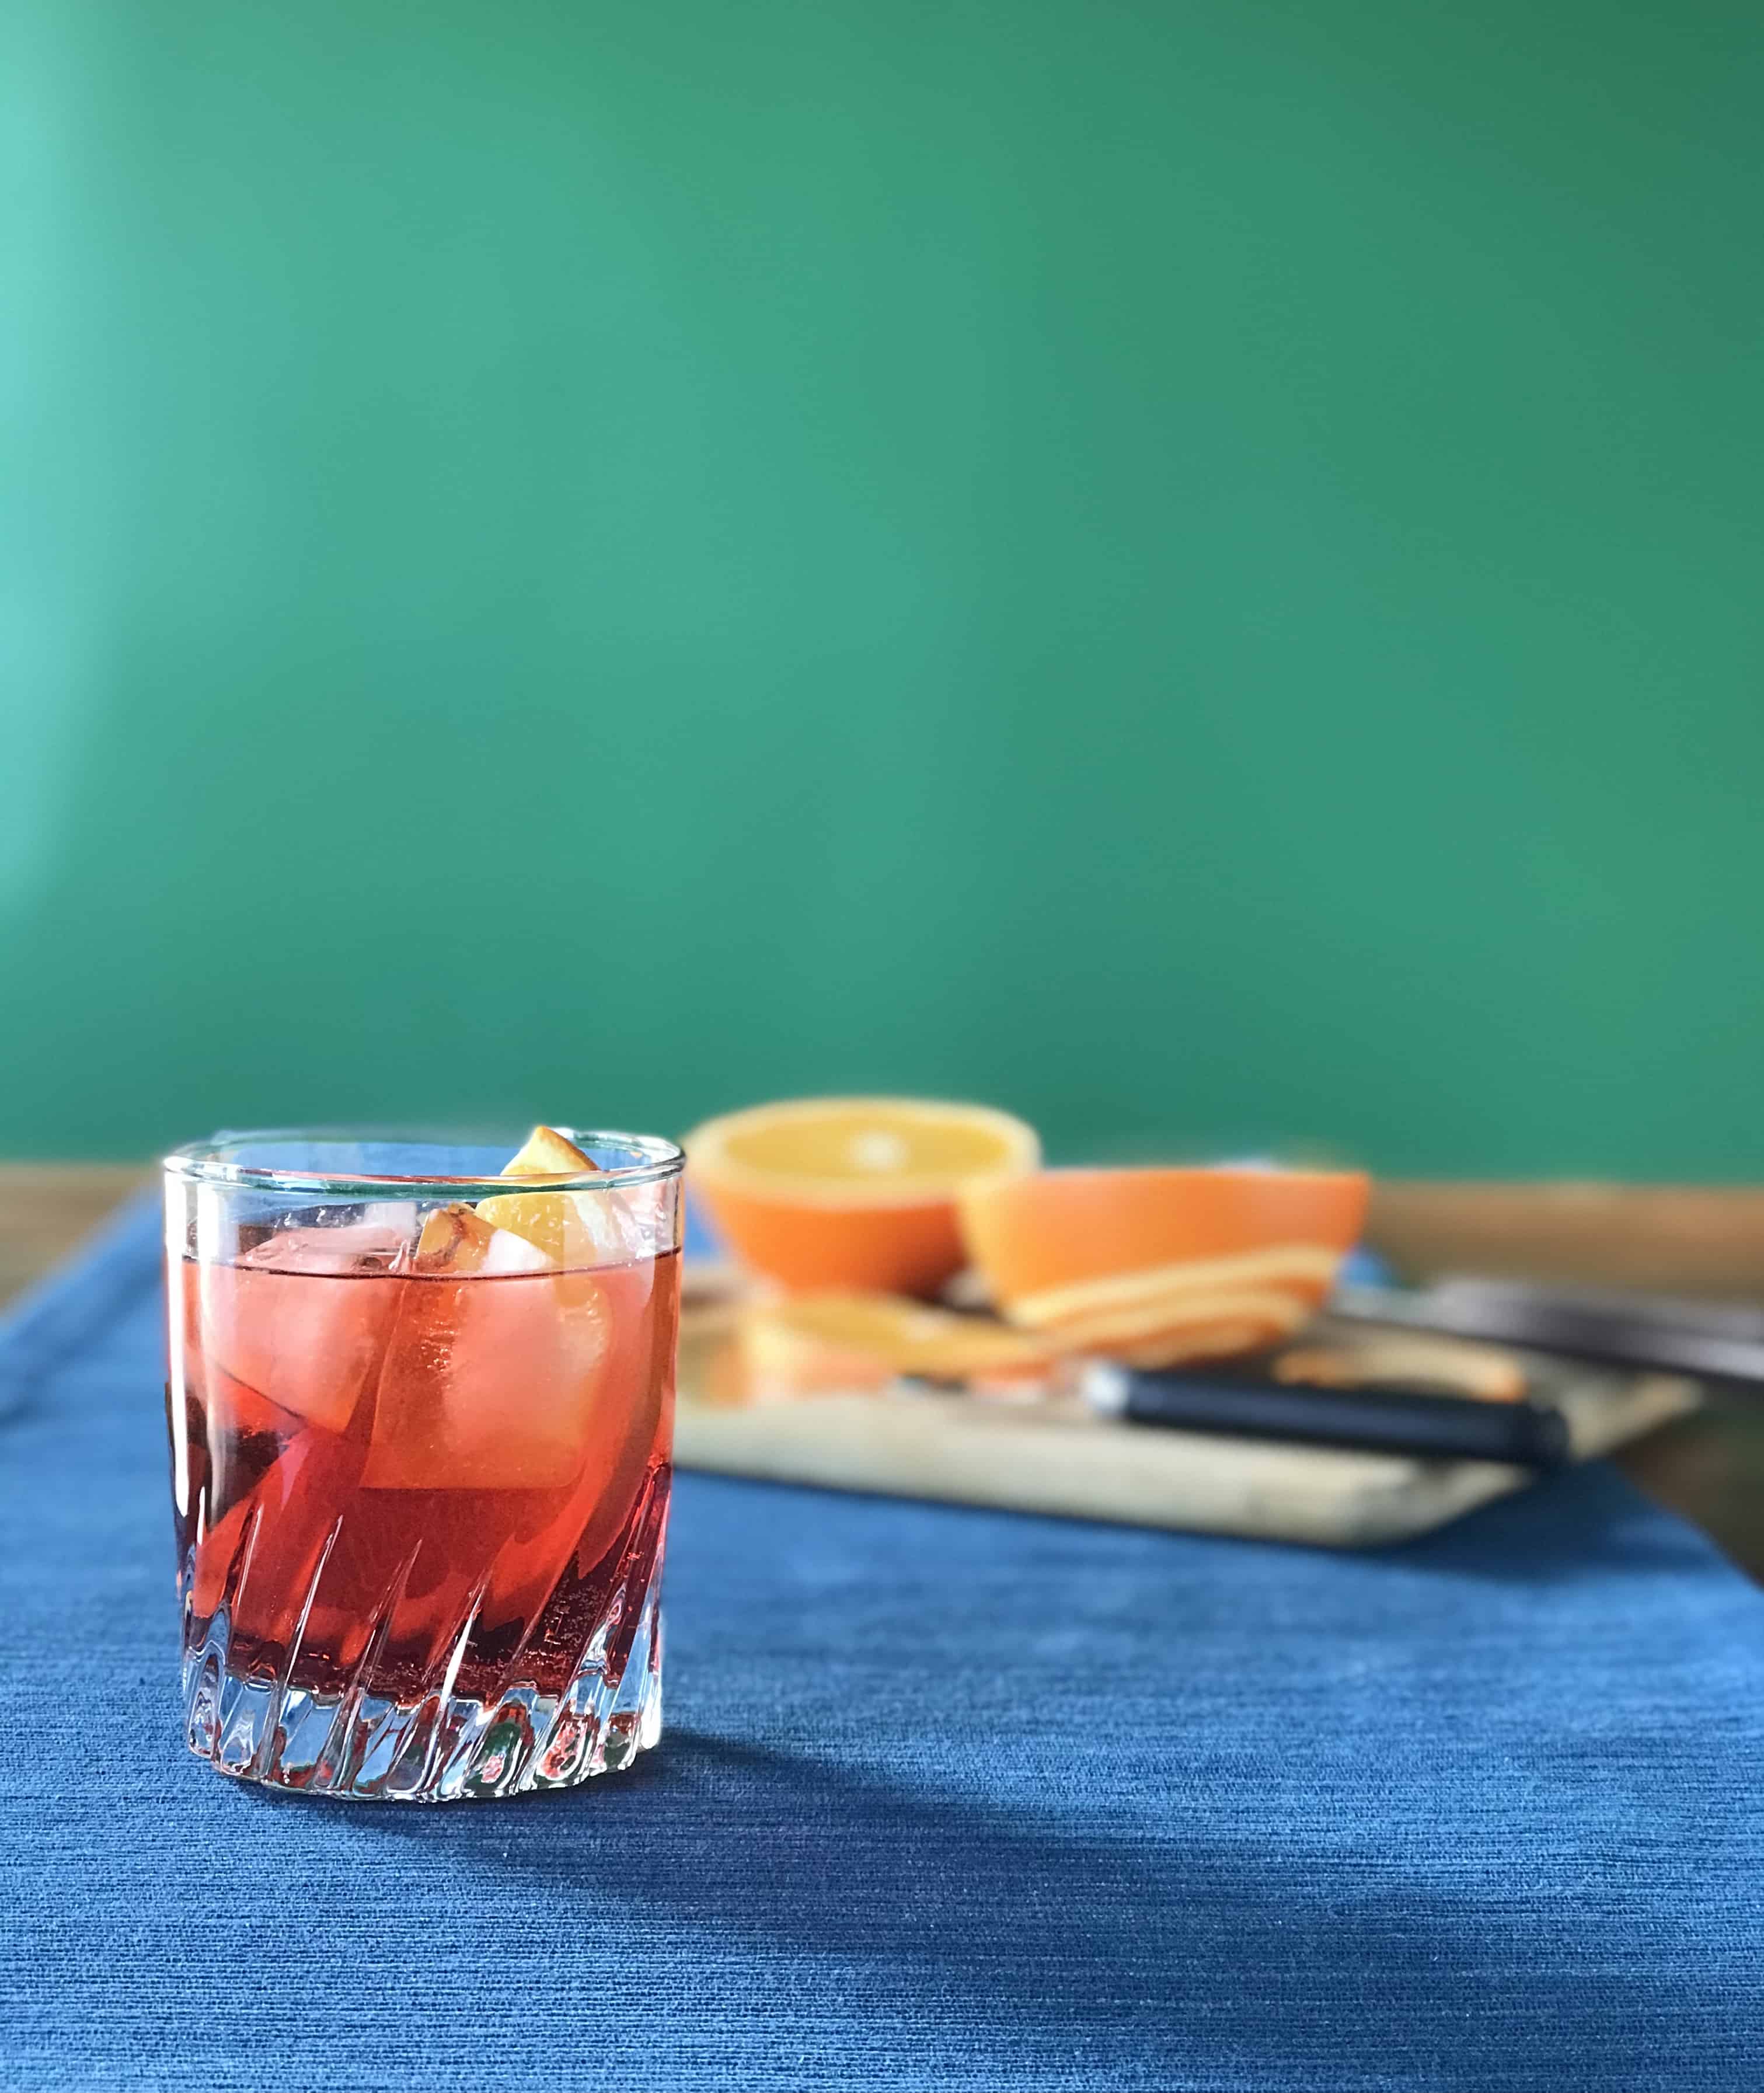 a classic Campari cocktail with vermouth and Prosecco in a glass with ice and an orange slice next to a cutting board with oranges on it